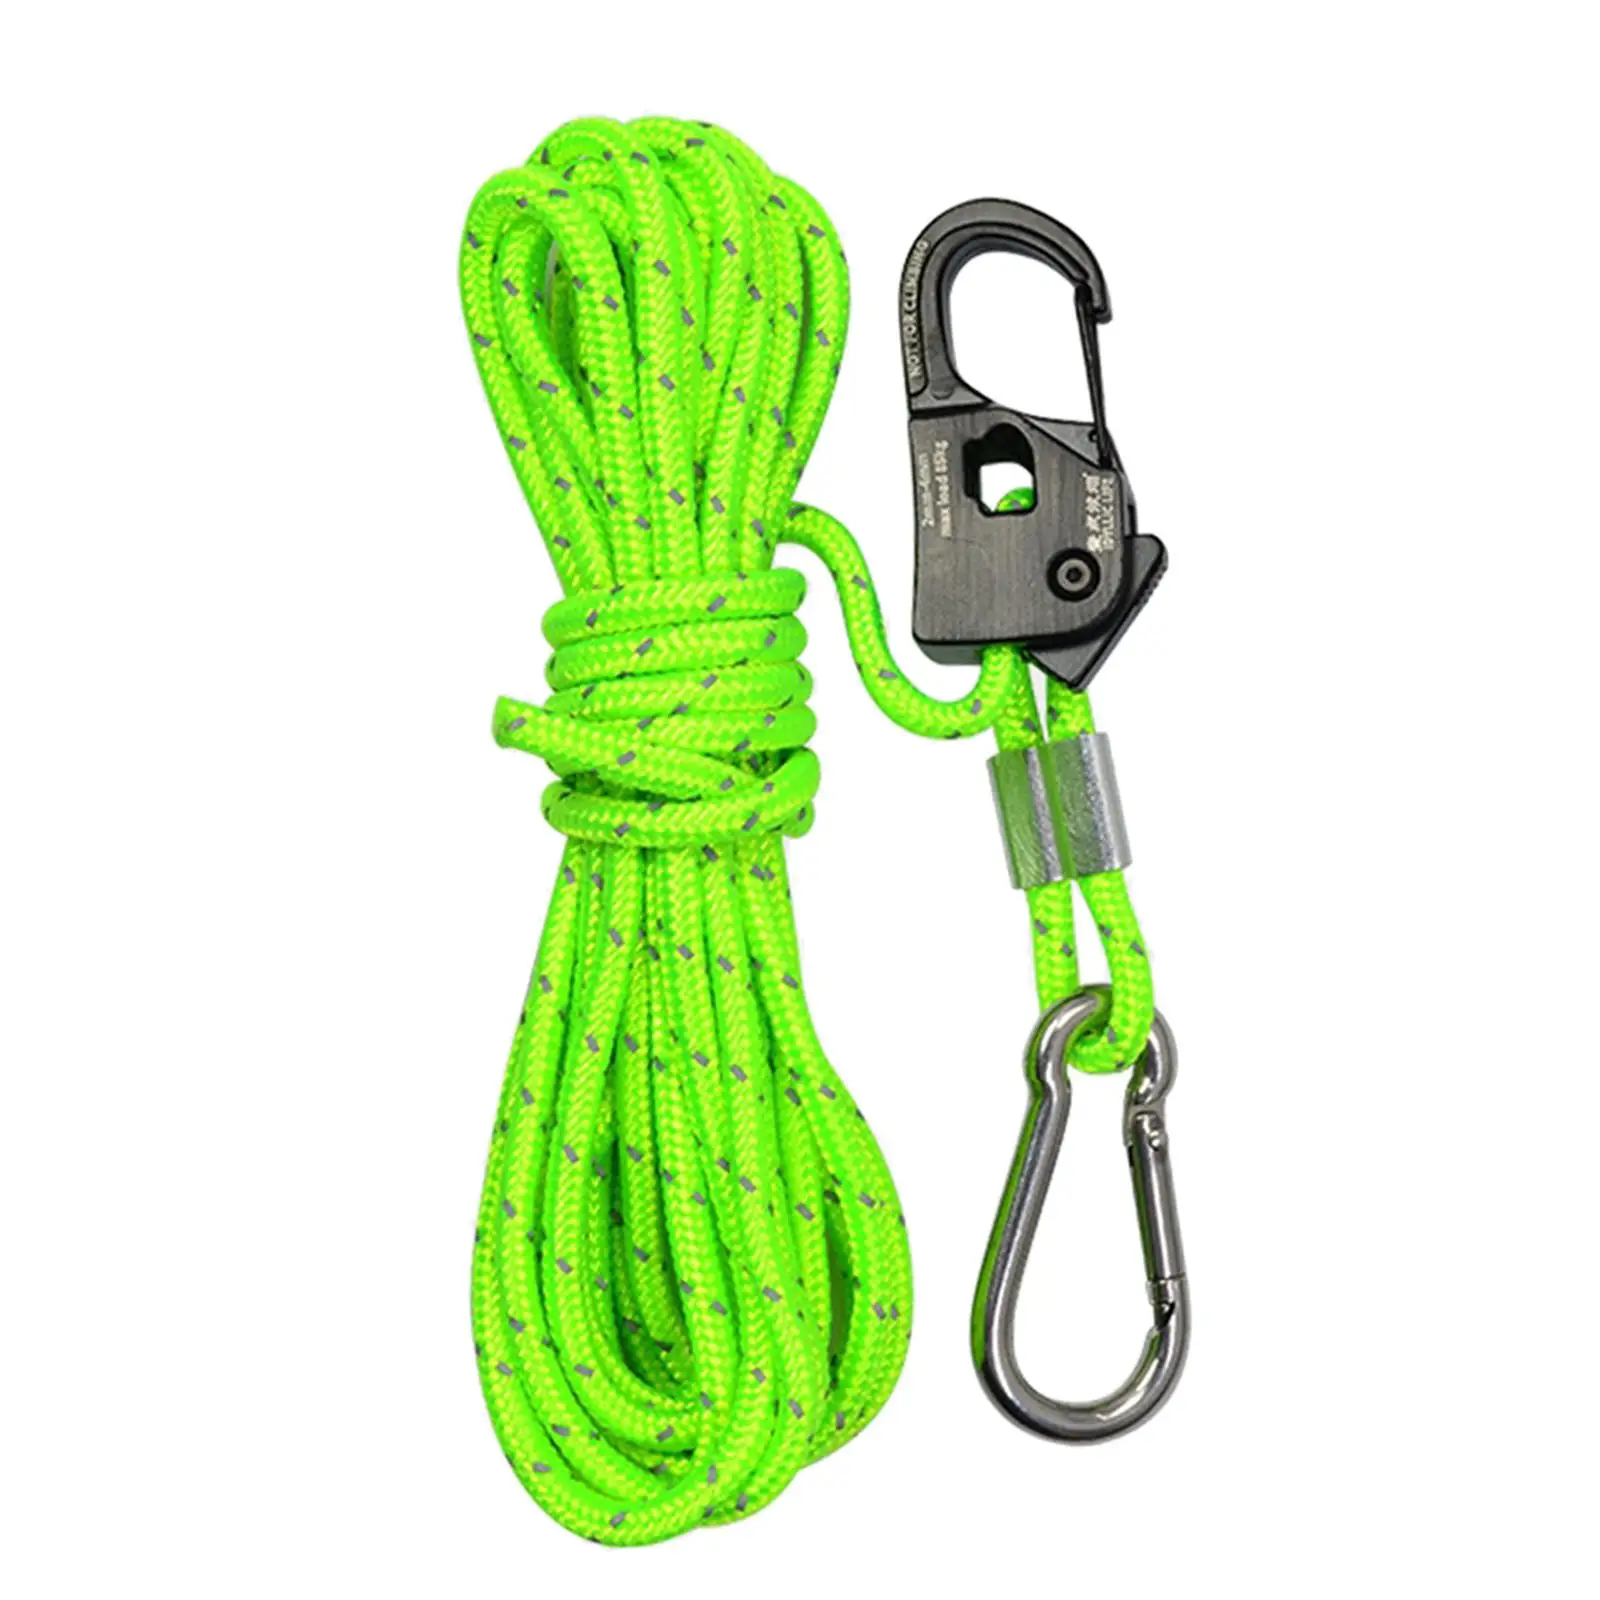 4mm Tent Guy Rope with Pulley Tent Guide Rope Fast Locking Nylon Lanyard Aluminum Alloy Self Locking Regulator for Hiking